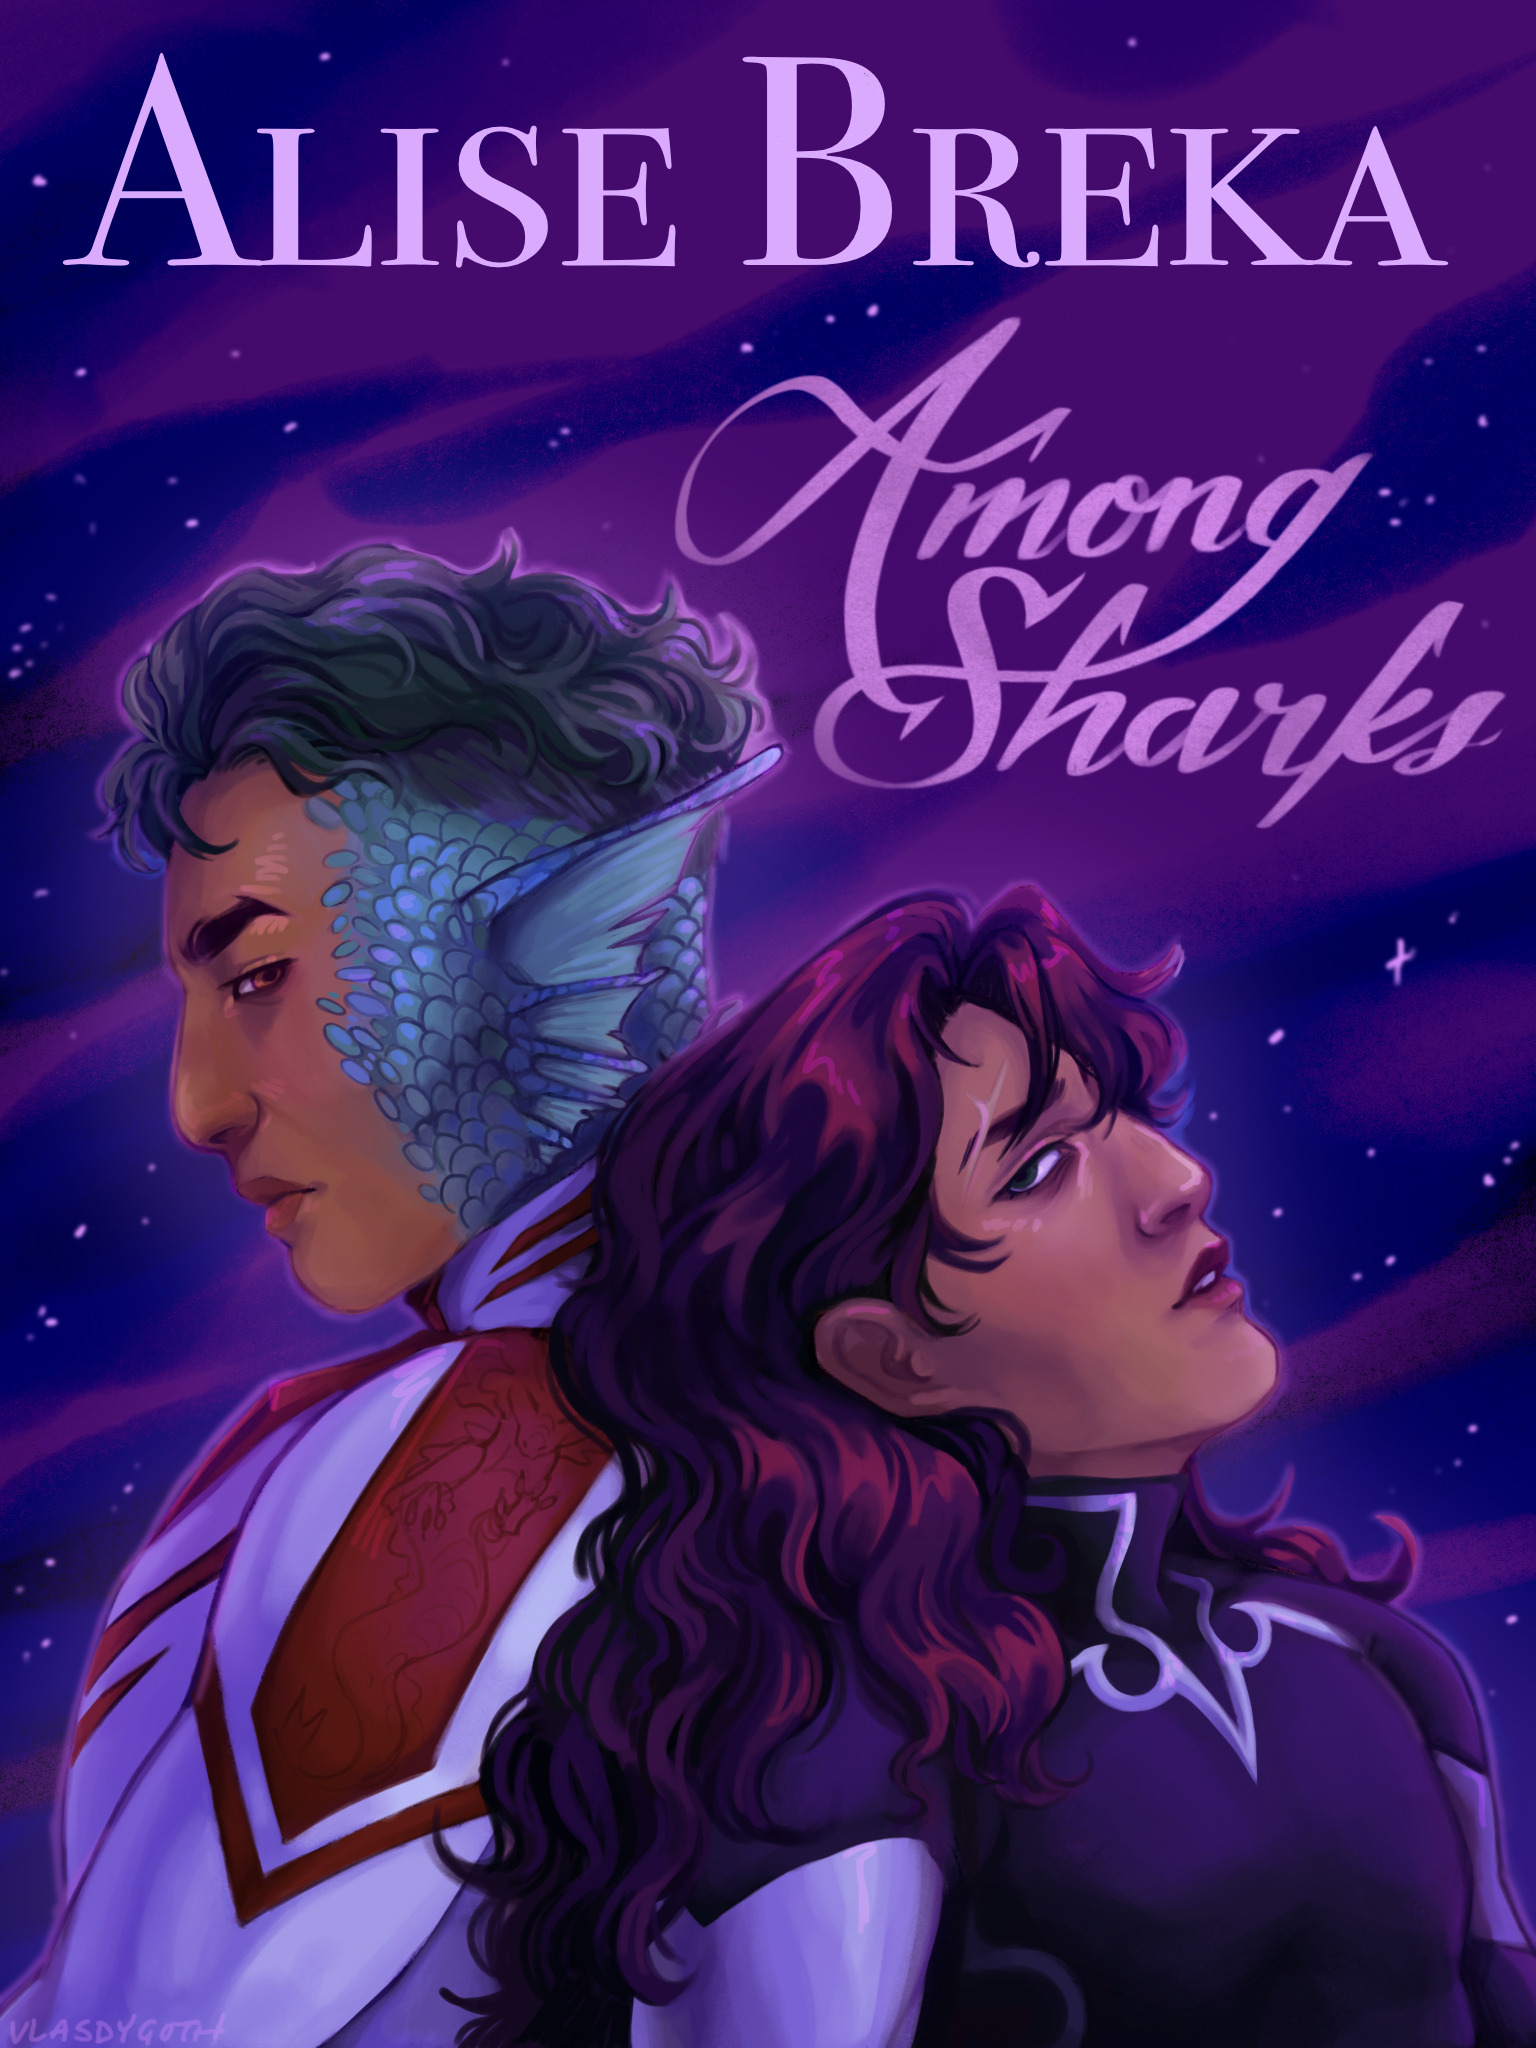 Cover for Among Sharks. Misericorde and Cor'rina stand back-to-back in front of a nebula